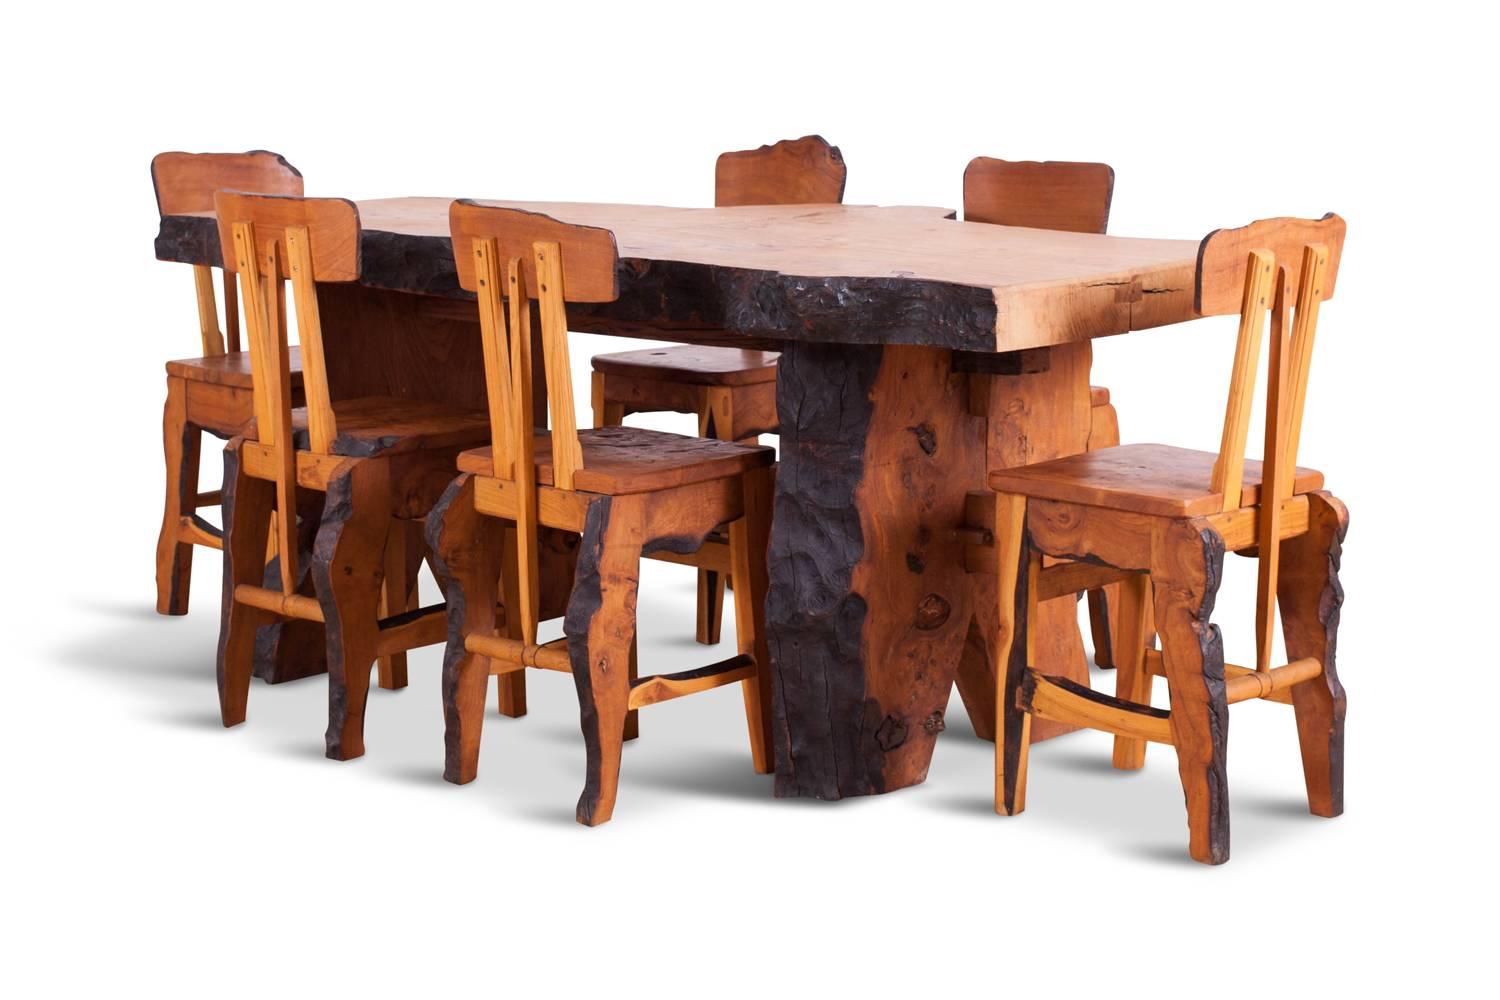 Nakashima style wabi sabi dining set in French elm (extinct)
matching table and chairs custom designed in an Atelier Français in the 1960s
Artisanal character gives a very personal feel and soul to your interior.
An ideal set for an eclectic